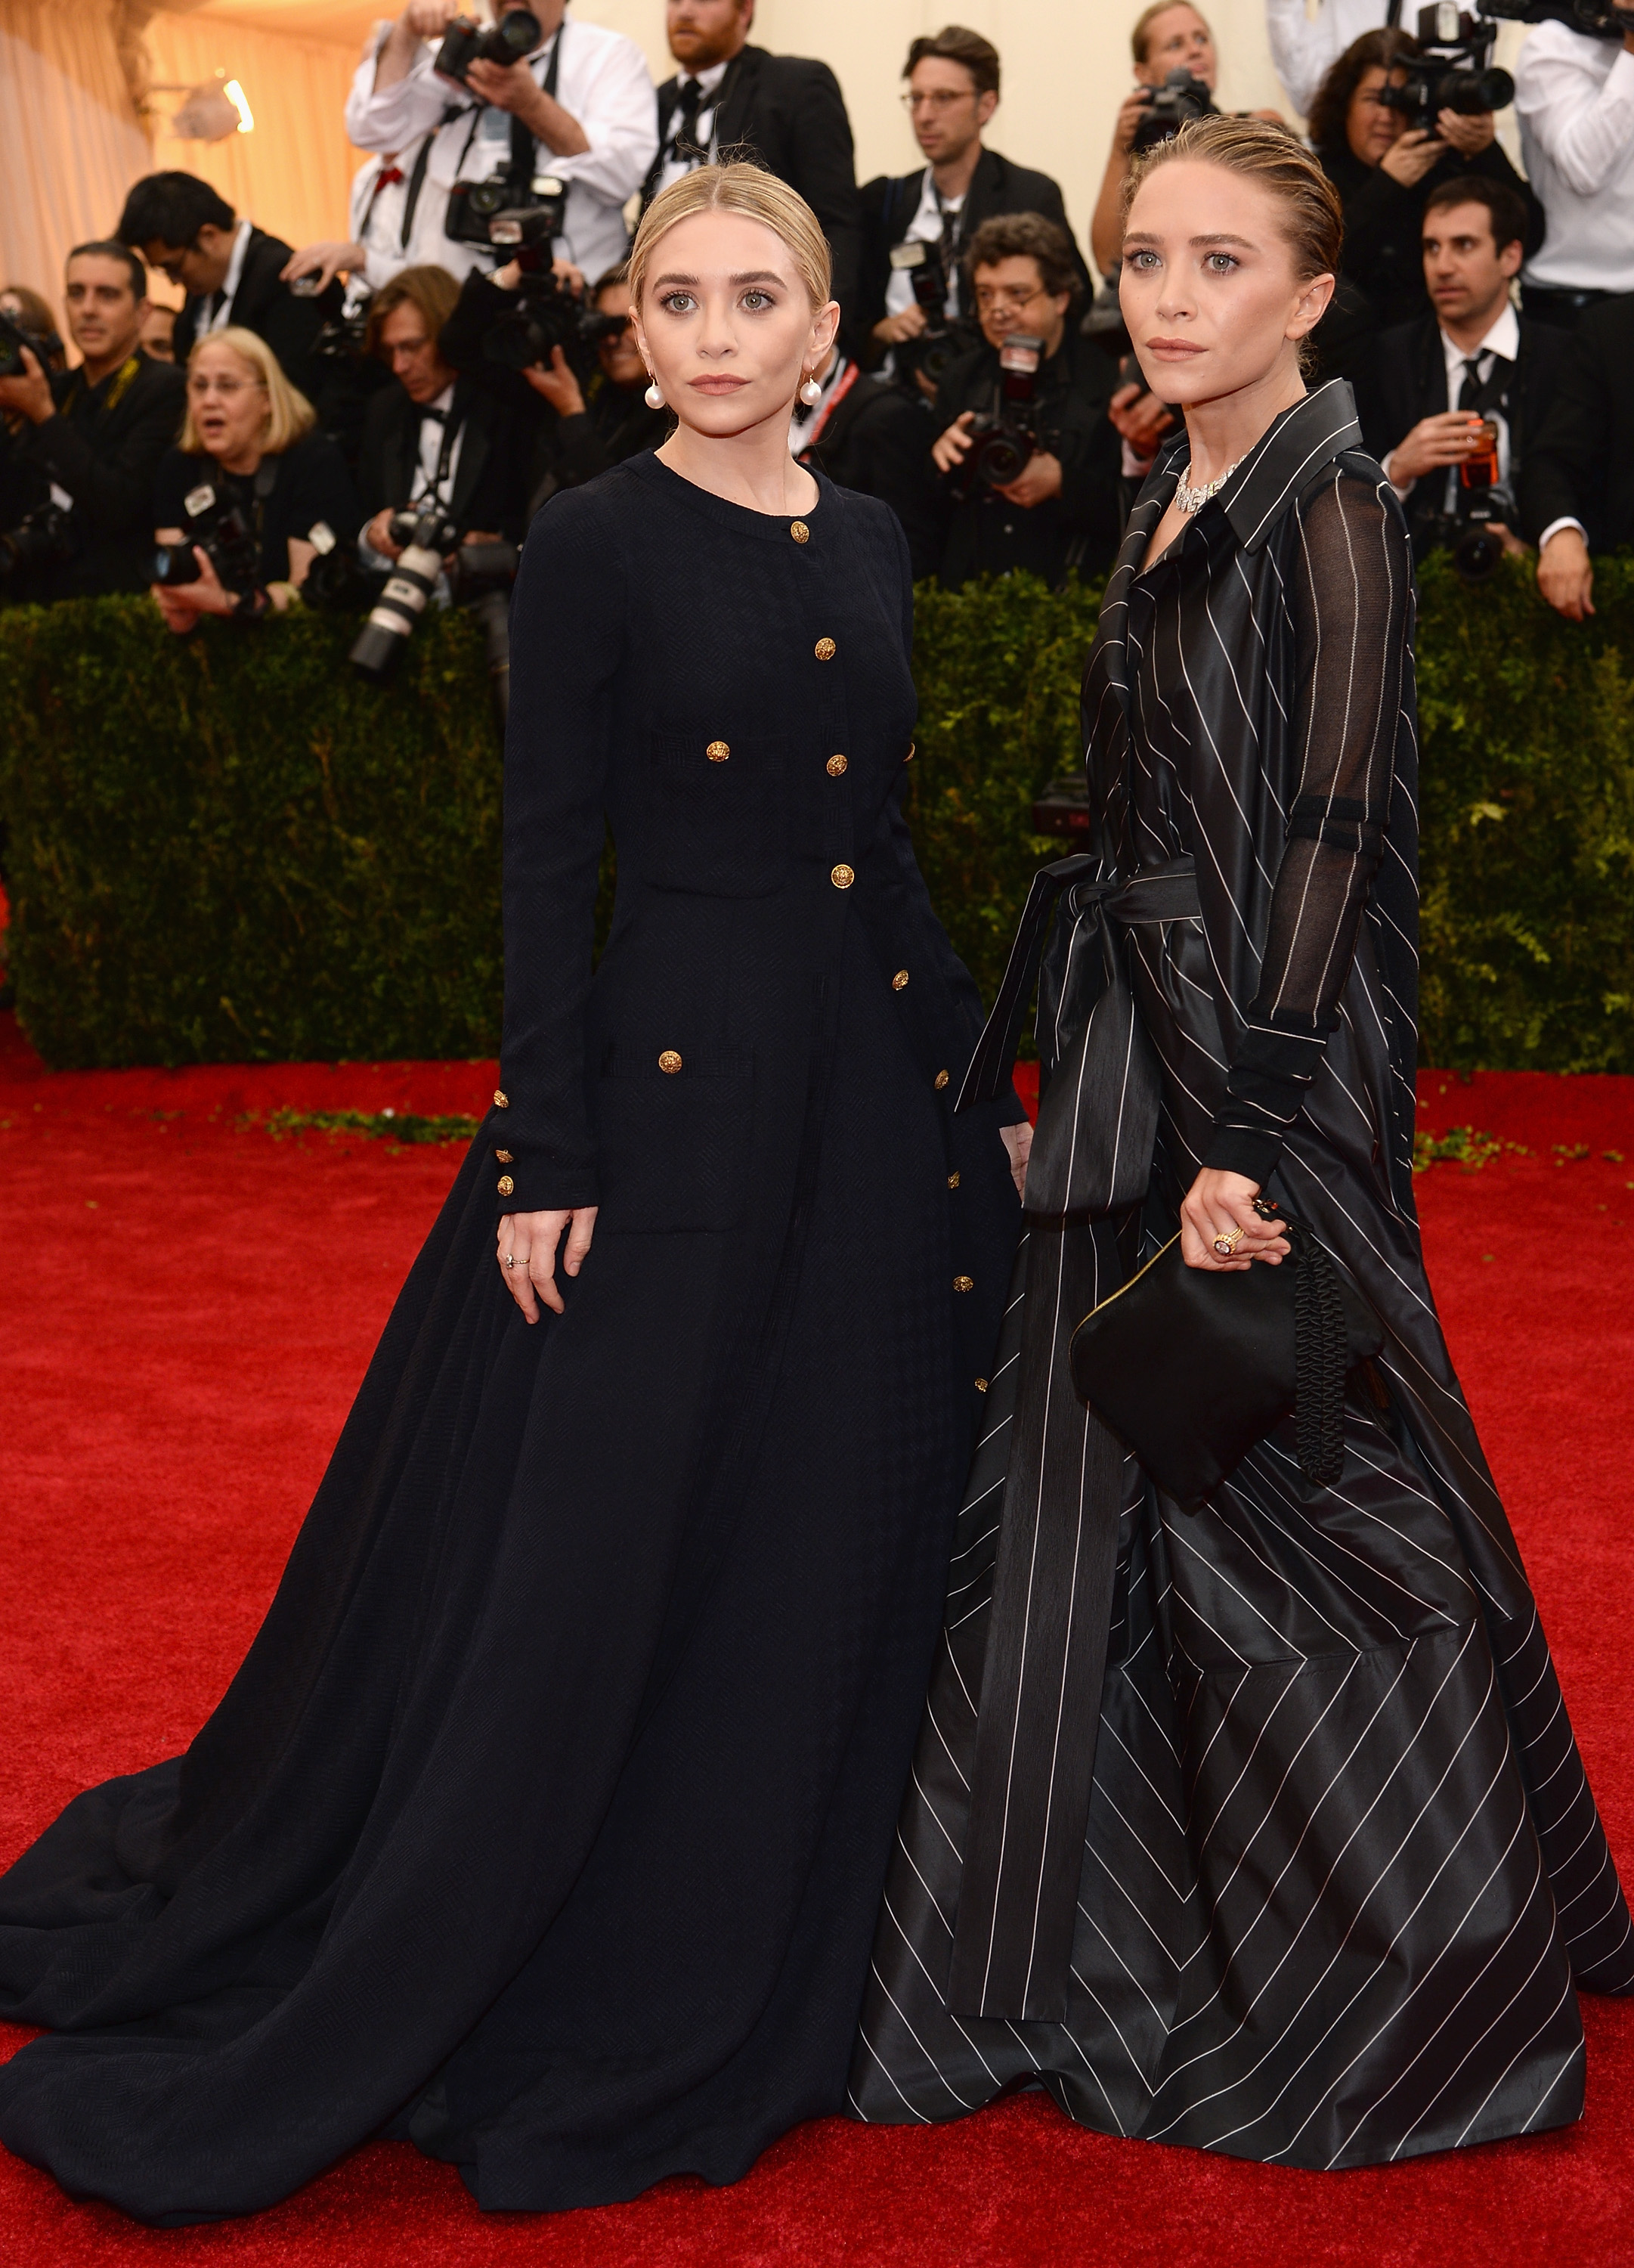 Olsen Twins Prune: Pose For the Cameras Like Mary-Kate and Ashley ...